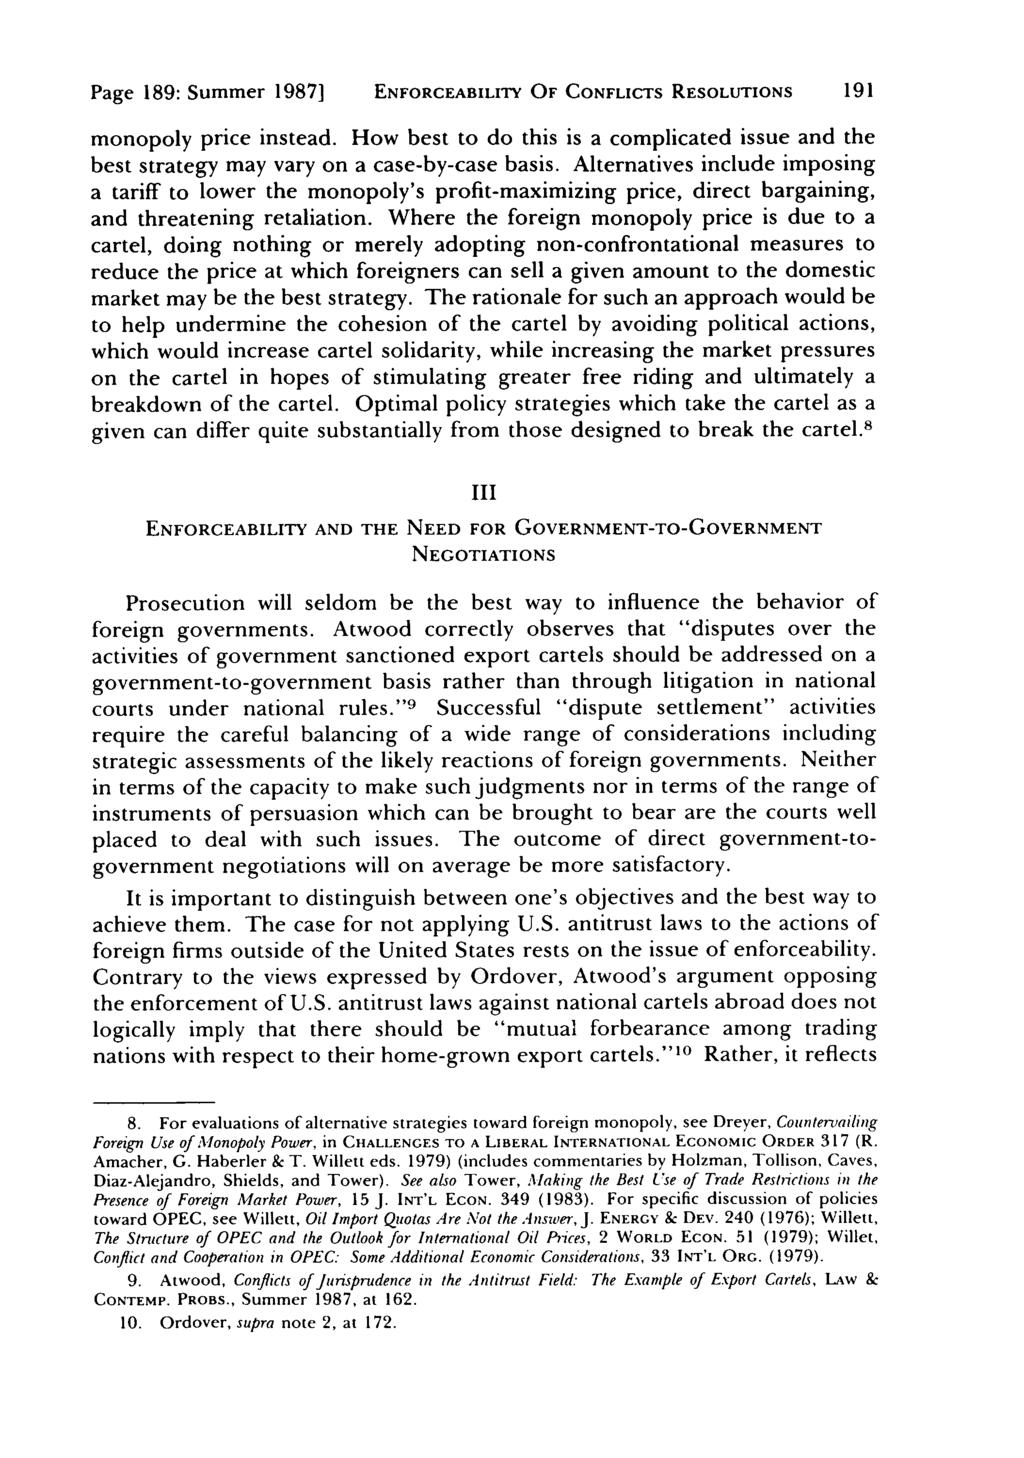 Page 189: Summer 1987] ENFORCEABILITY OF CONFLICTS RESOLUTIONS monopoly price instead. How best to do this is a complicated issue and the best strategy may vary on a case-by-case basis.